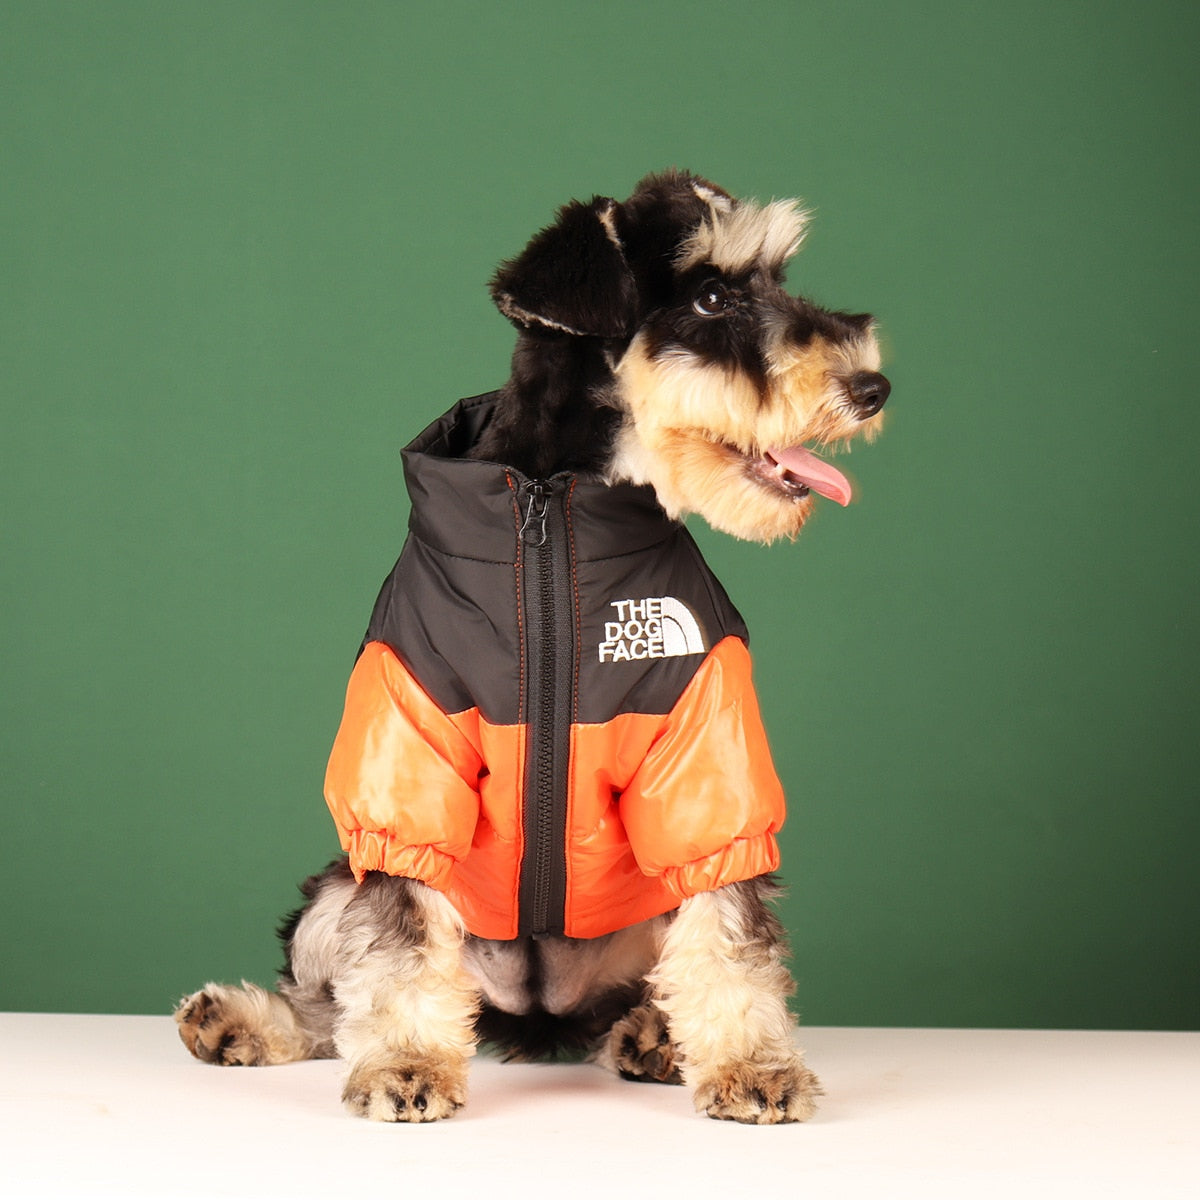 Windproof Jacket for Dogs